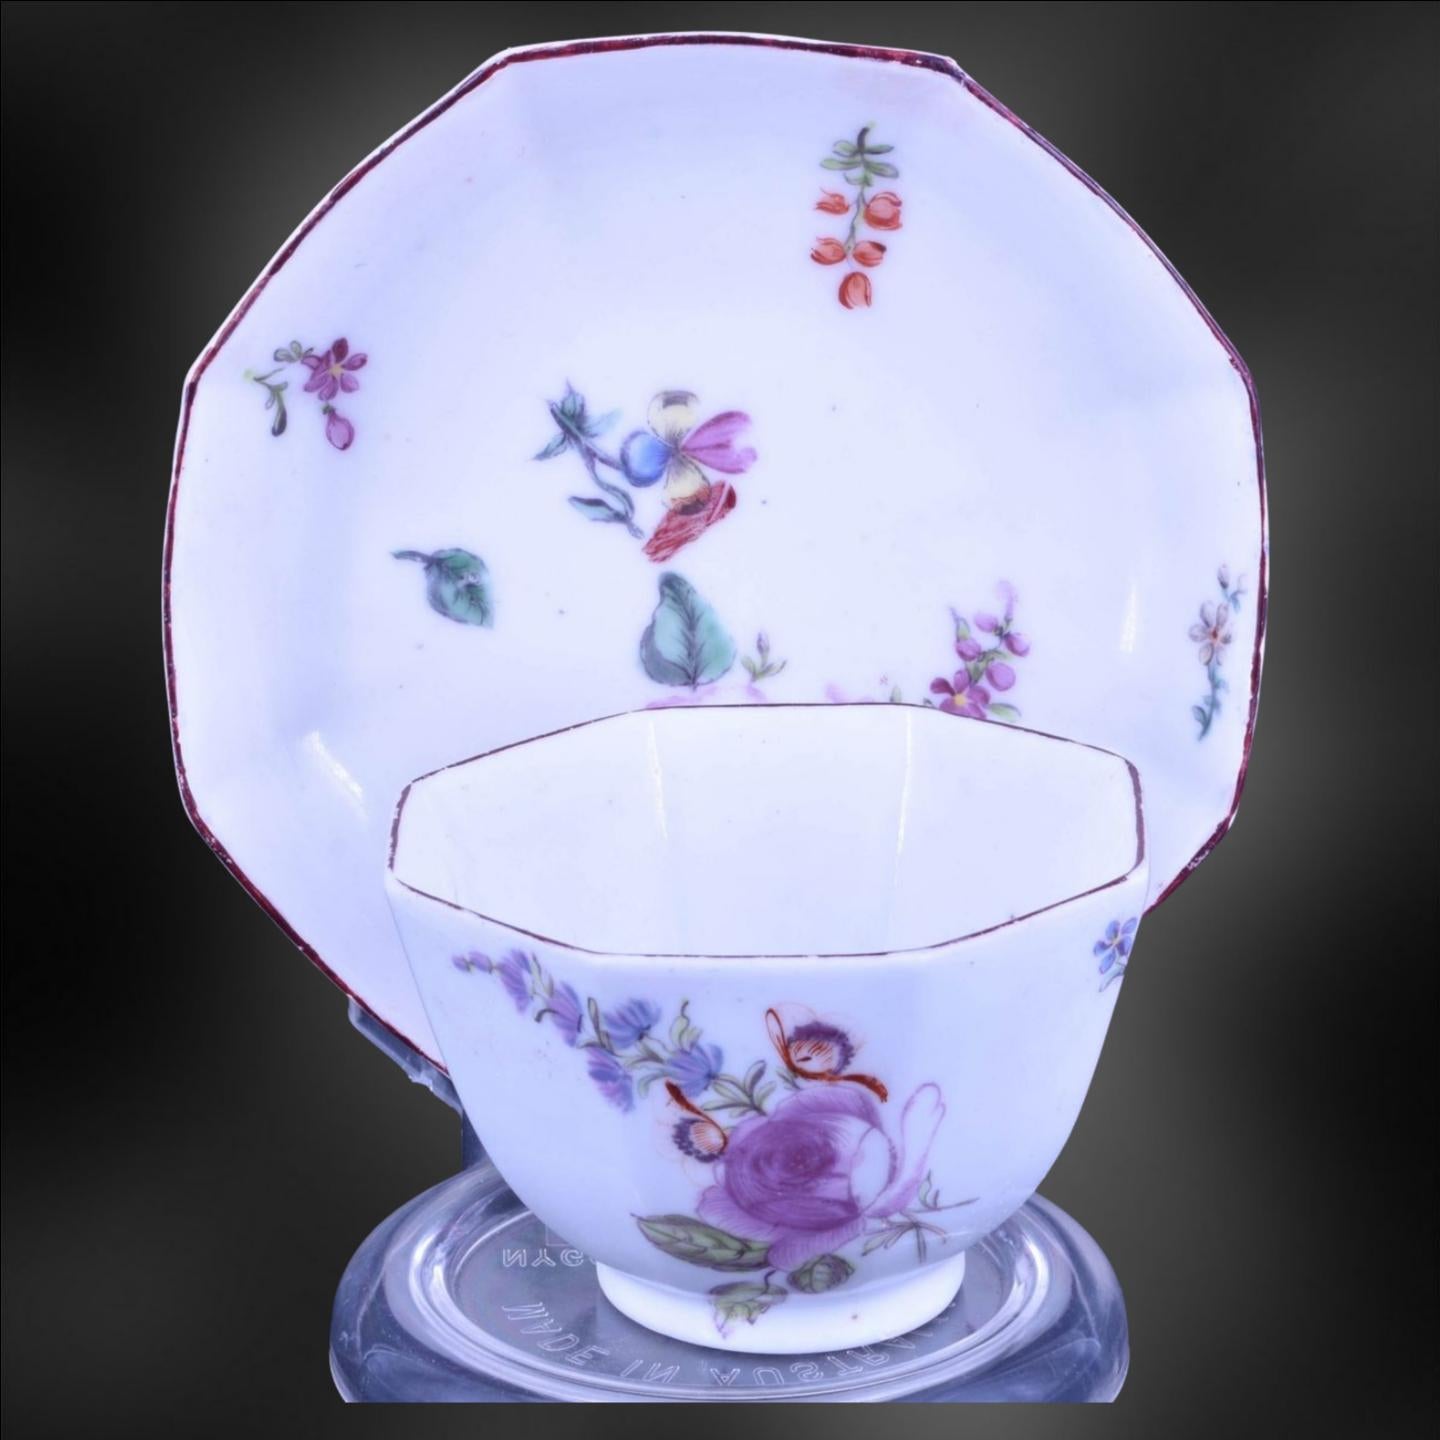 An octagonal tea bowl and matching saucer, decorated with Chelsea's usual beautiful flower painting. 

One of the most distinctive features of Chelsea porcelain is its intricate floral painting, which often featured detailed, lifelike renditions